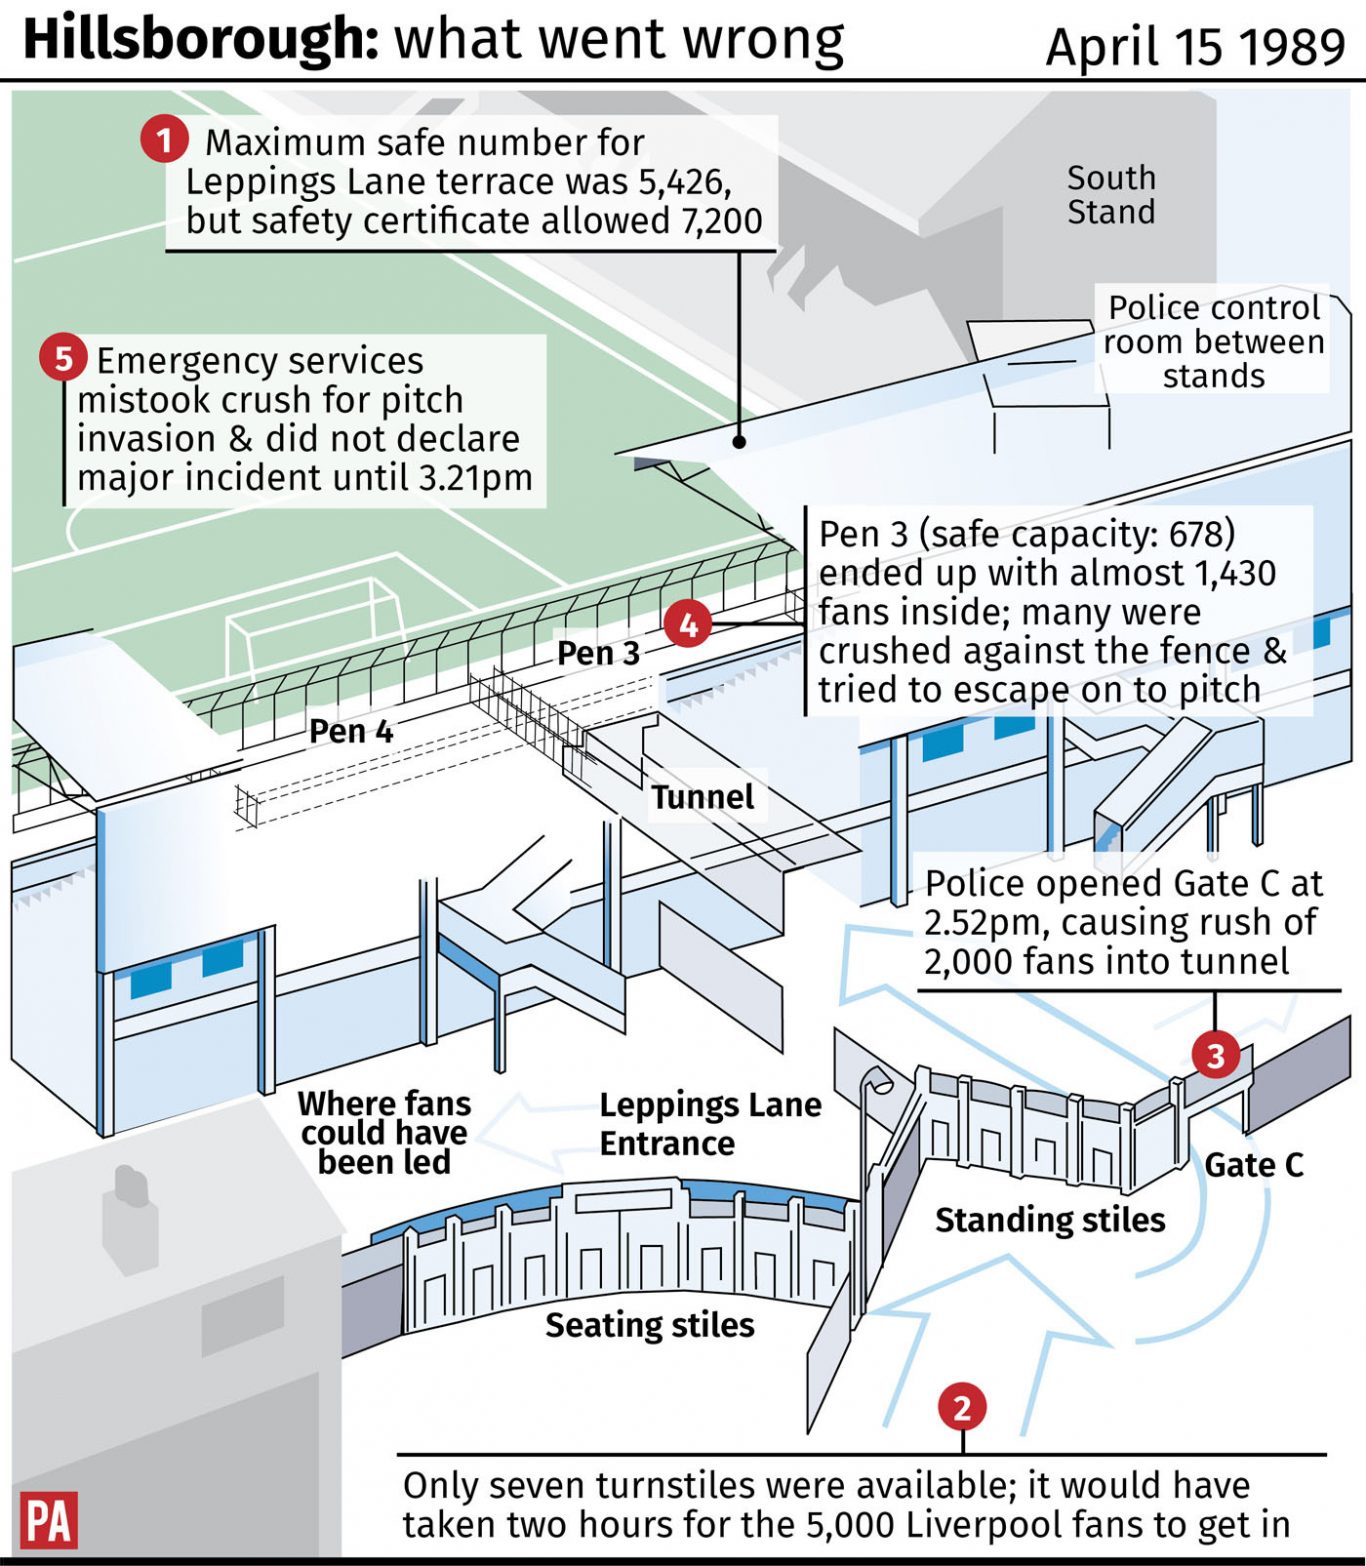 Hillsborough: what went wrong graphic